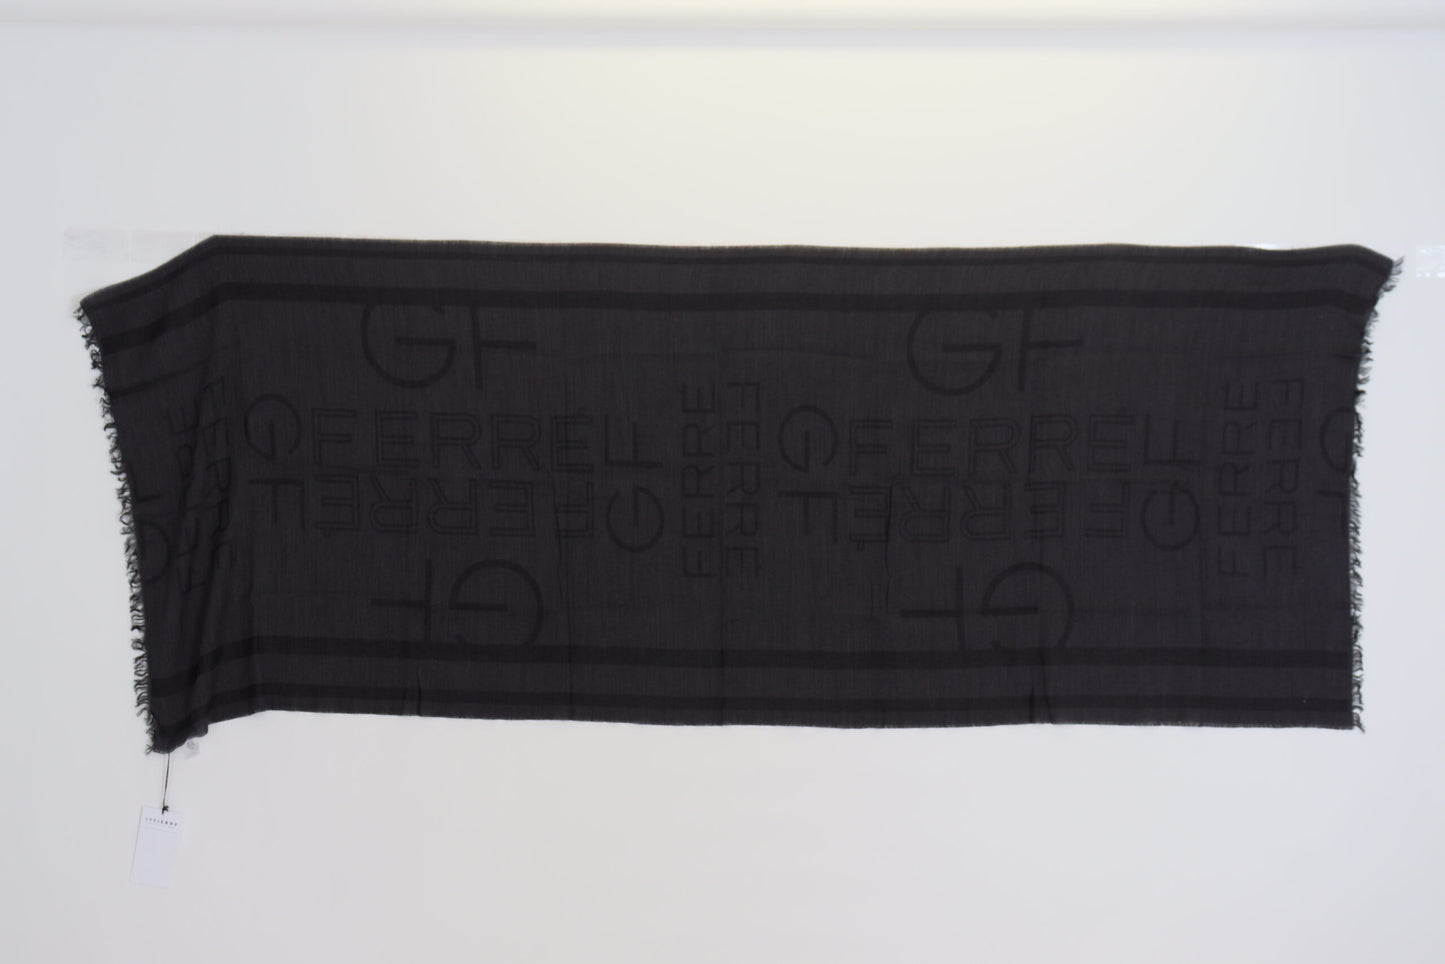 GF Ferre Black Wool Knitted Neck Wrap Shawl Fringes Scarf - Designed by GF Ferre Available to Buy at a Discounted Price on Moon Behind The Hill Online Designer Discount Store